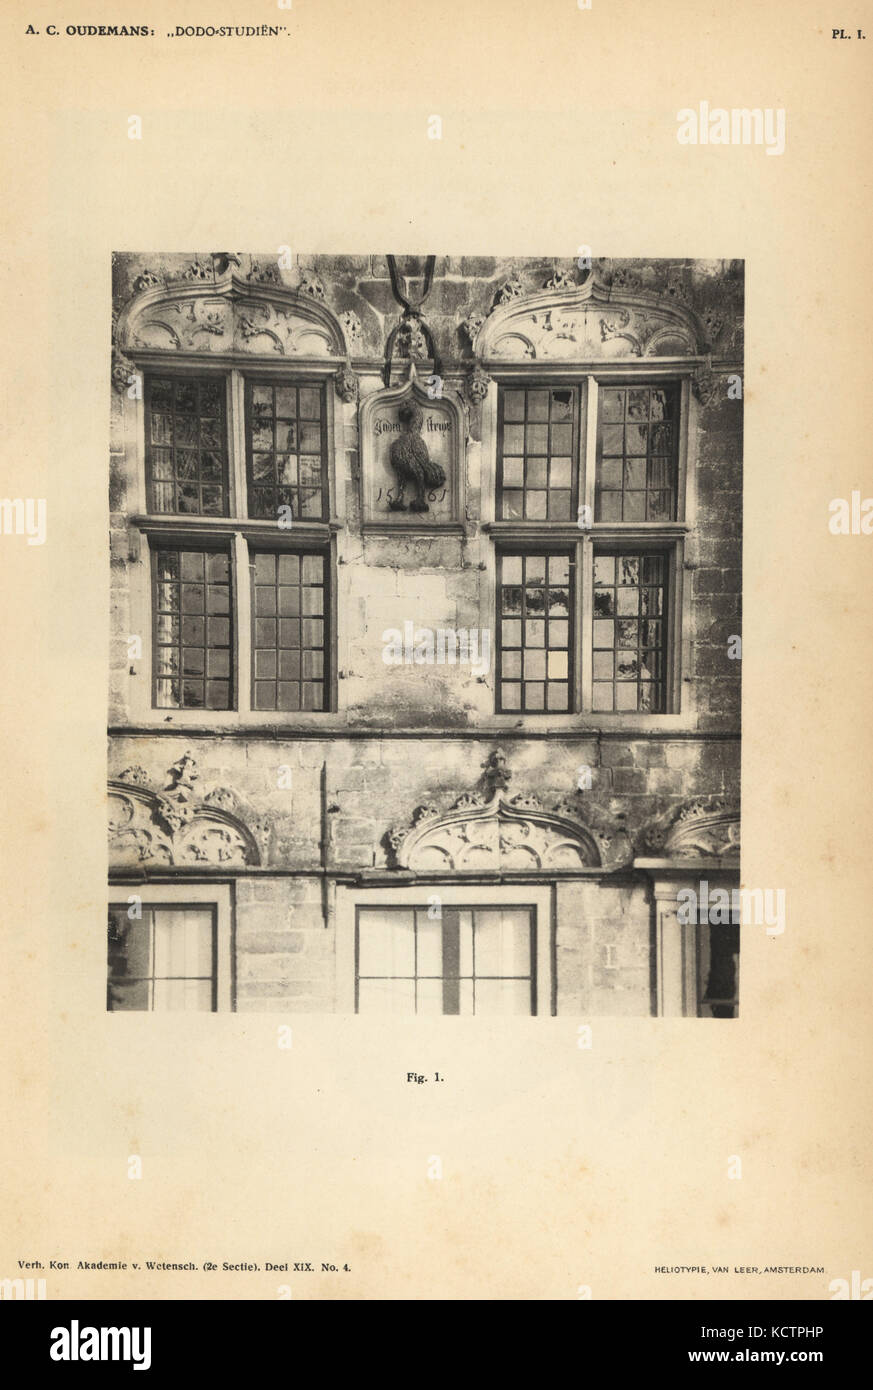 Dodo statue on the facade of the Scotch House in Veere, the Netherlands, 1561. Heliotype by Van Leer from Dr. Anthonie Cornelis Oudemans' Dodo Studies, Amsterdam, Johannes Muller, 1917. Stock Photo